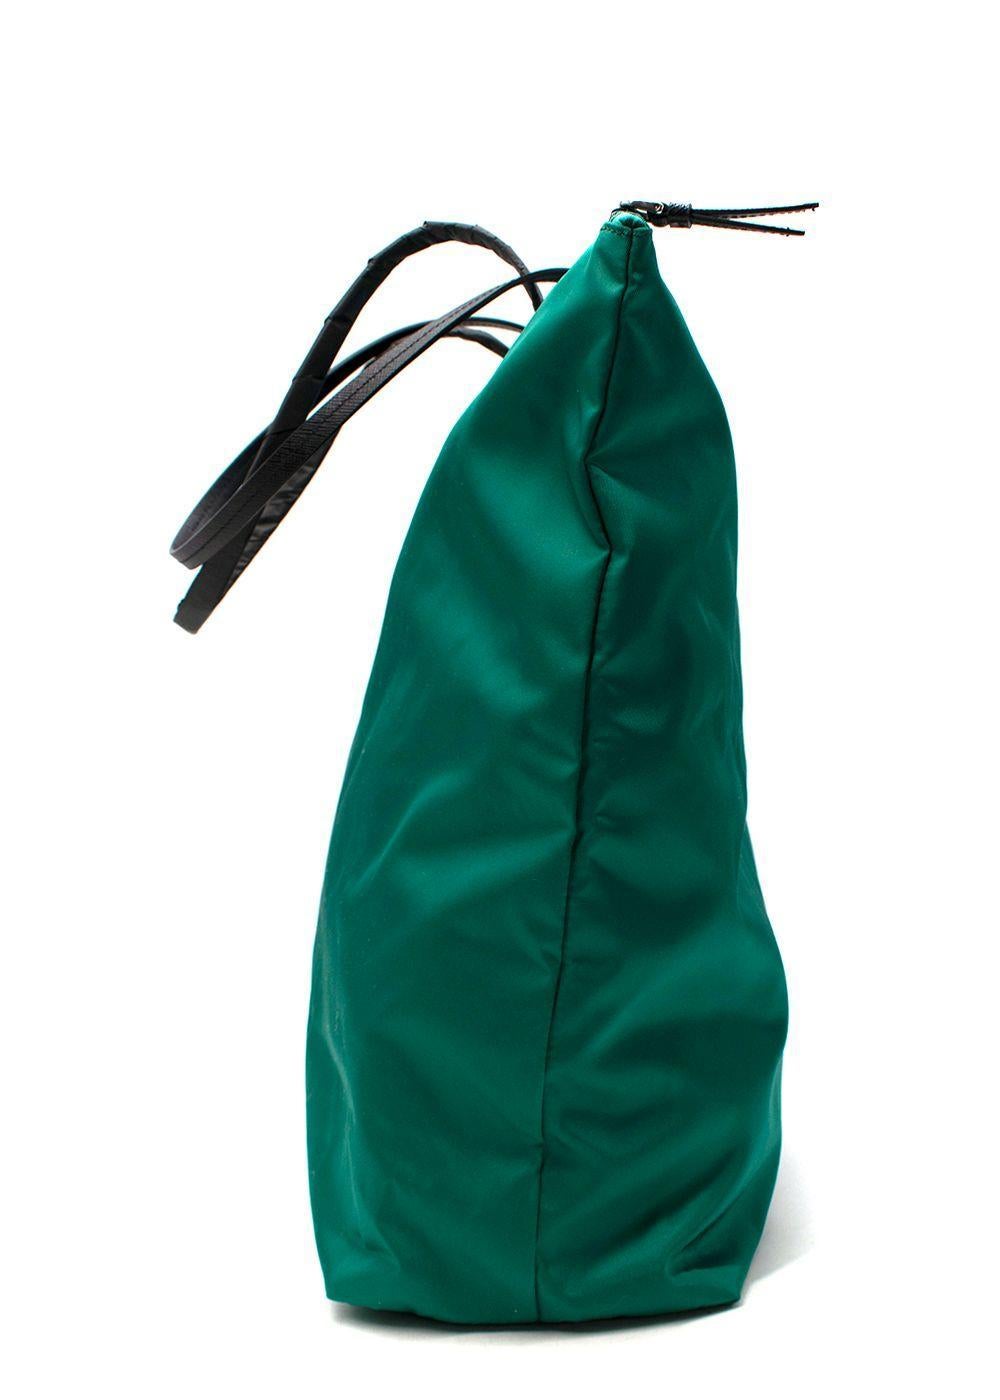 Green Tessuto Nylon Tote Bag

- Green nylon tote bag
- Top zip closure
- One compartment with a zipped pockets
- Two black leather top handles
- Signature triangle hardware Prada applique to the front

Materials:
Leather
Nylon

Made in Italy

PLEASE